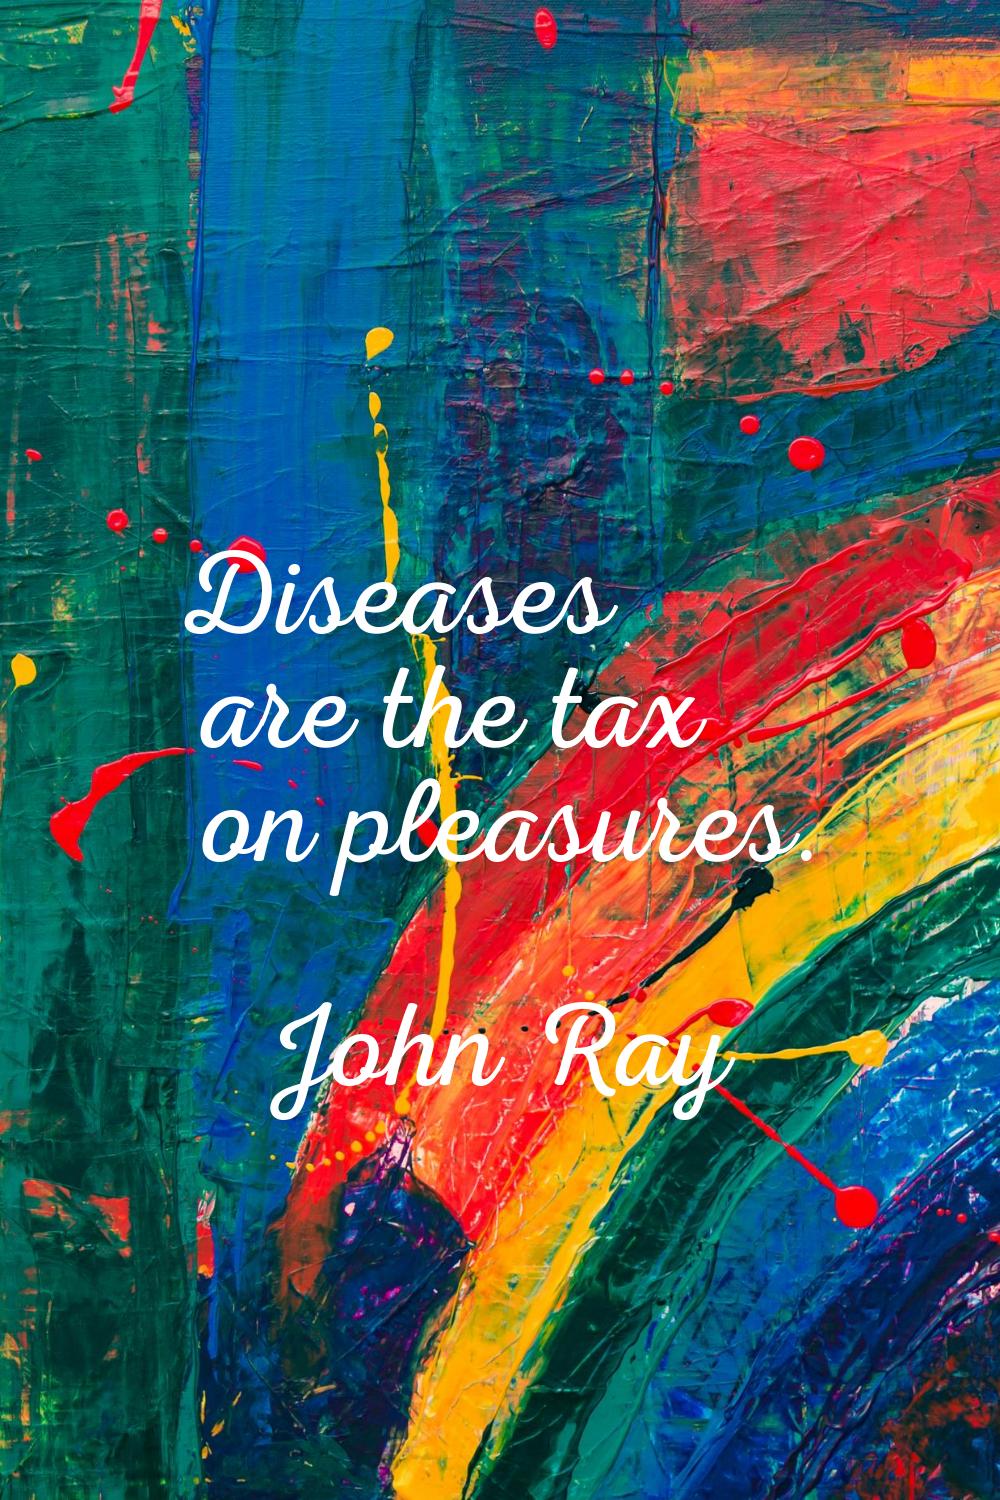 Diseases are the tax on pleasures.